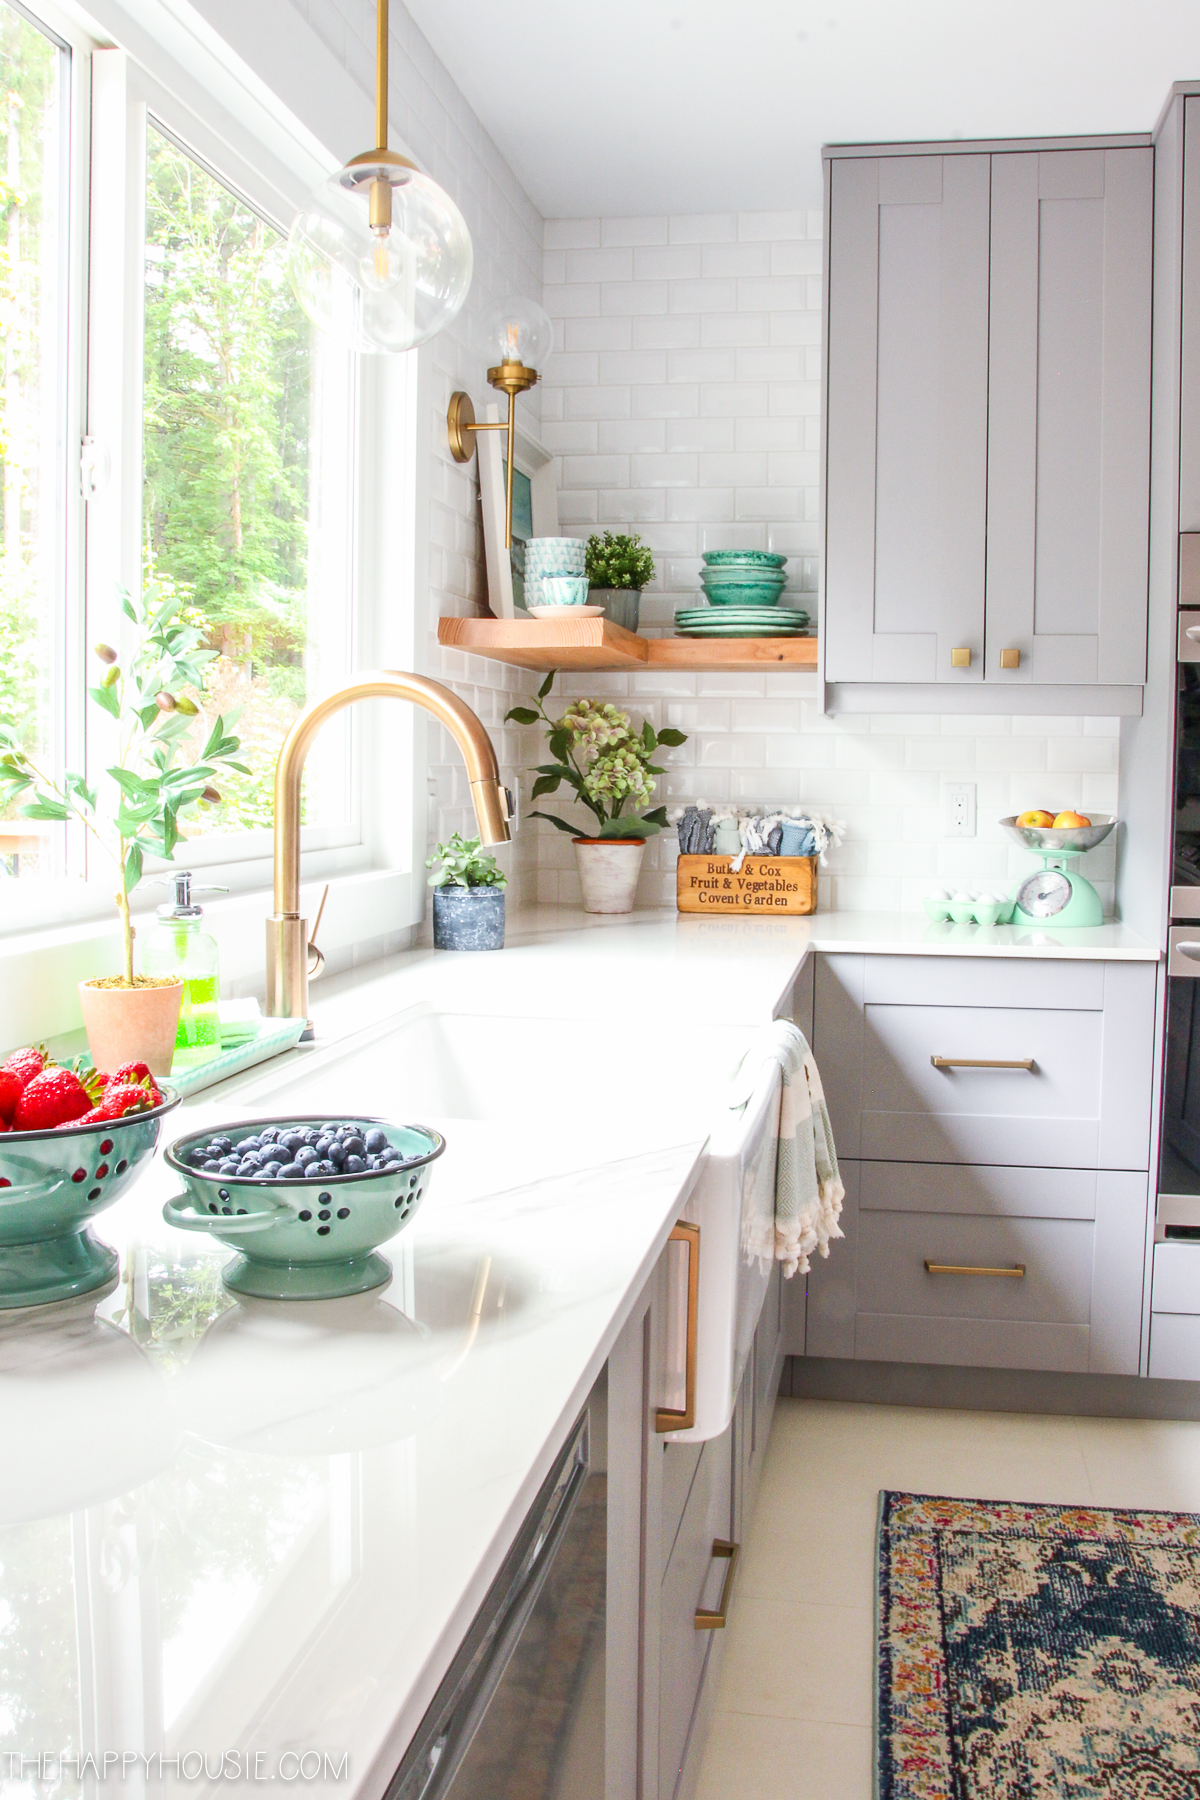 The Best All-In-One Online Source for Beautiful Kitchen Finishes